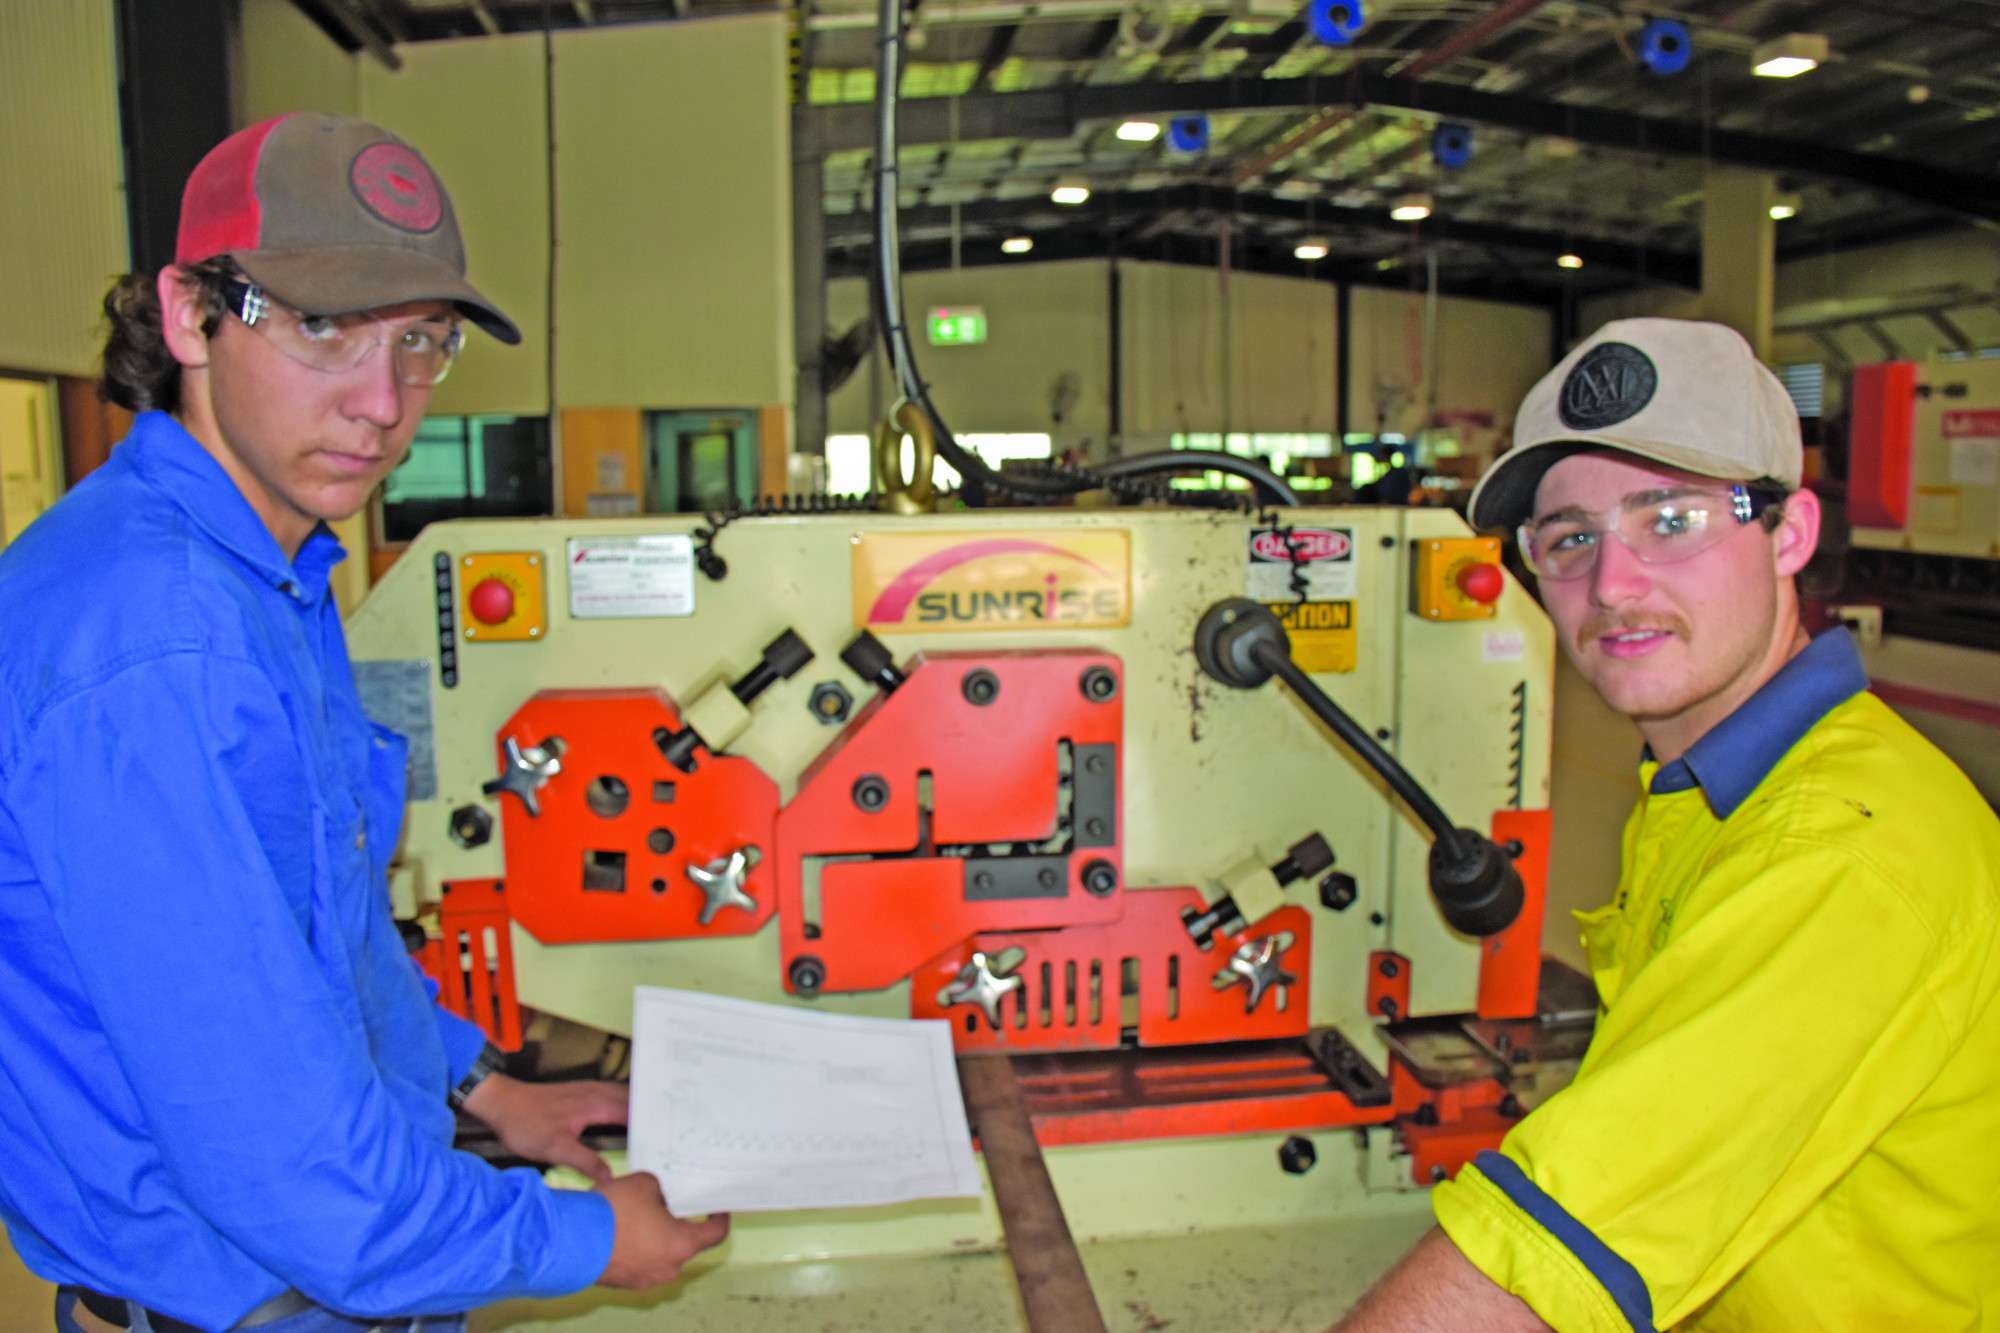 Mareeba State High School year 11 students Angus Campman and Jett McDowall are currently undertaking a certificate II in Rural Operations through the school